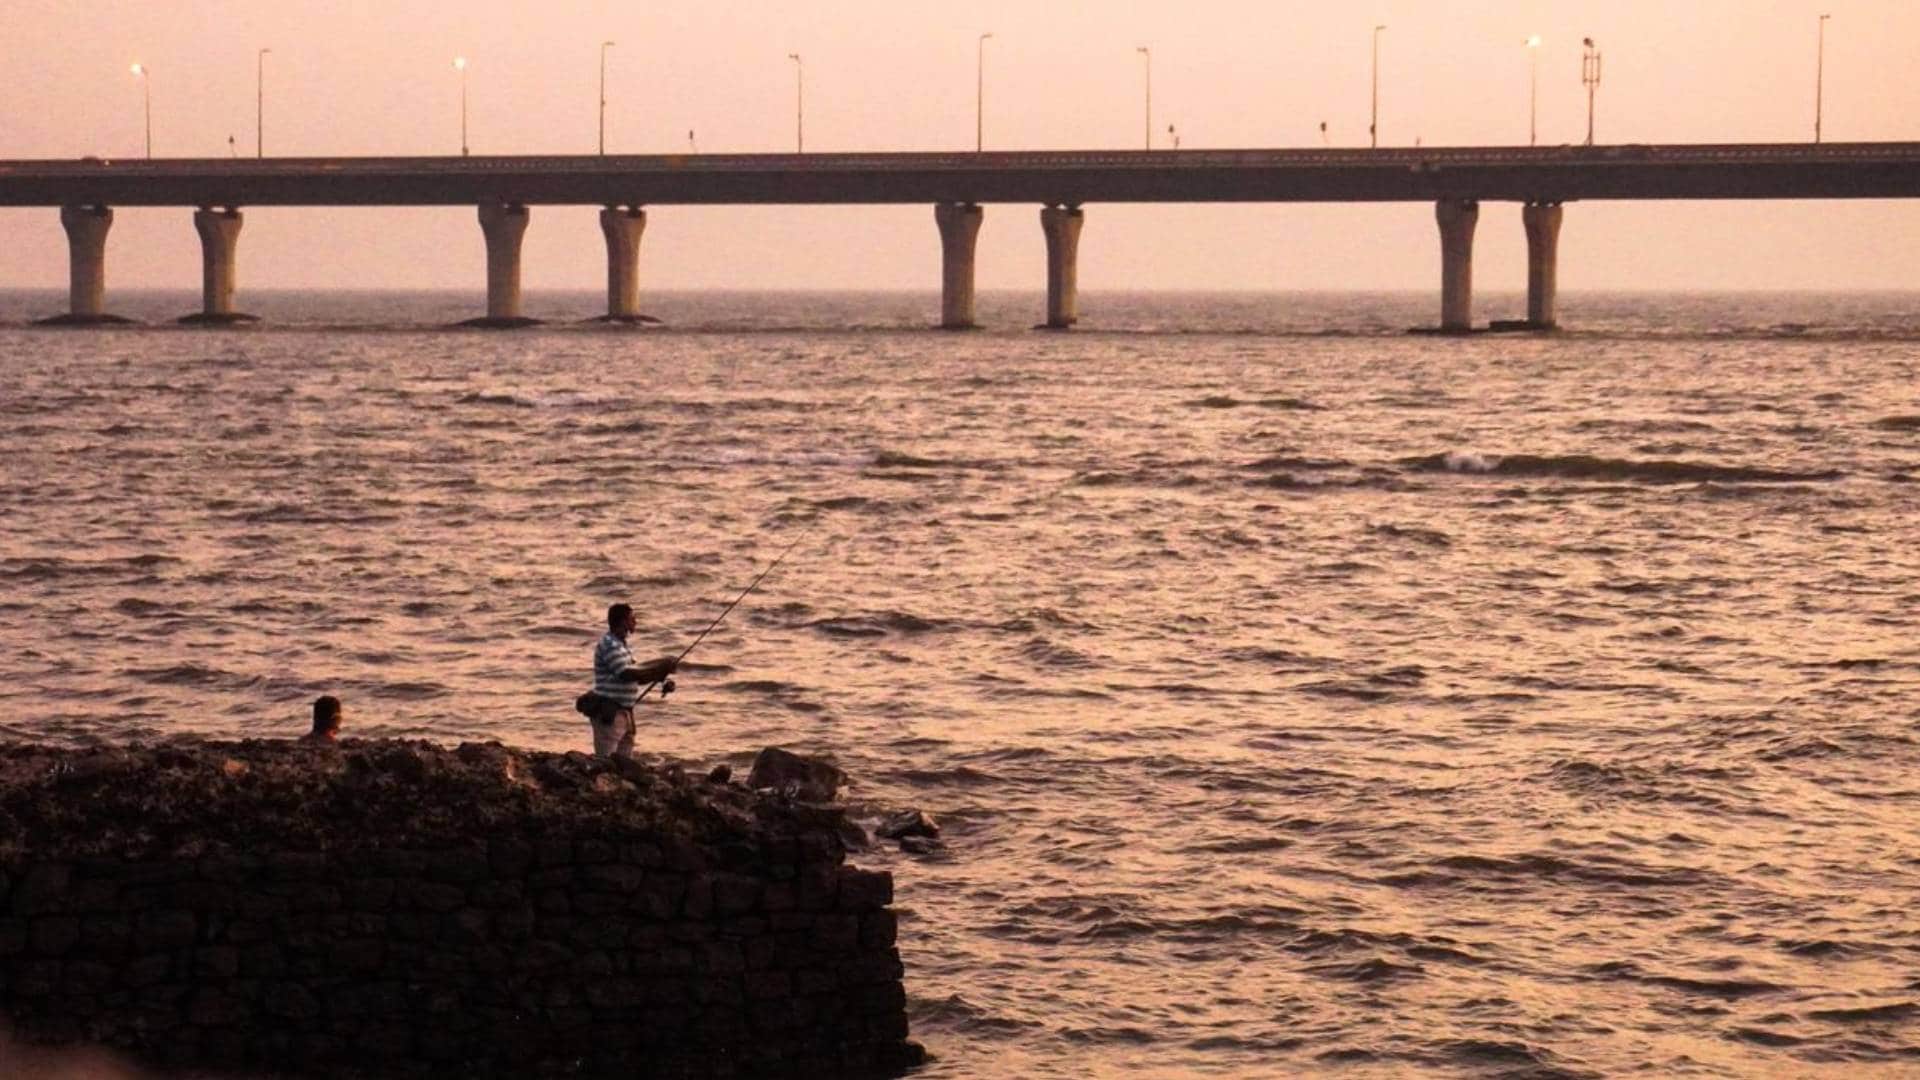 Livelihoods of Worli's Koli community, impacted by coastal infra projects, further battered by COVID-19 crisis